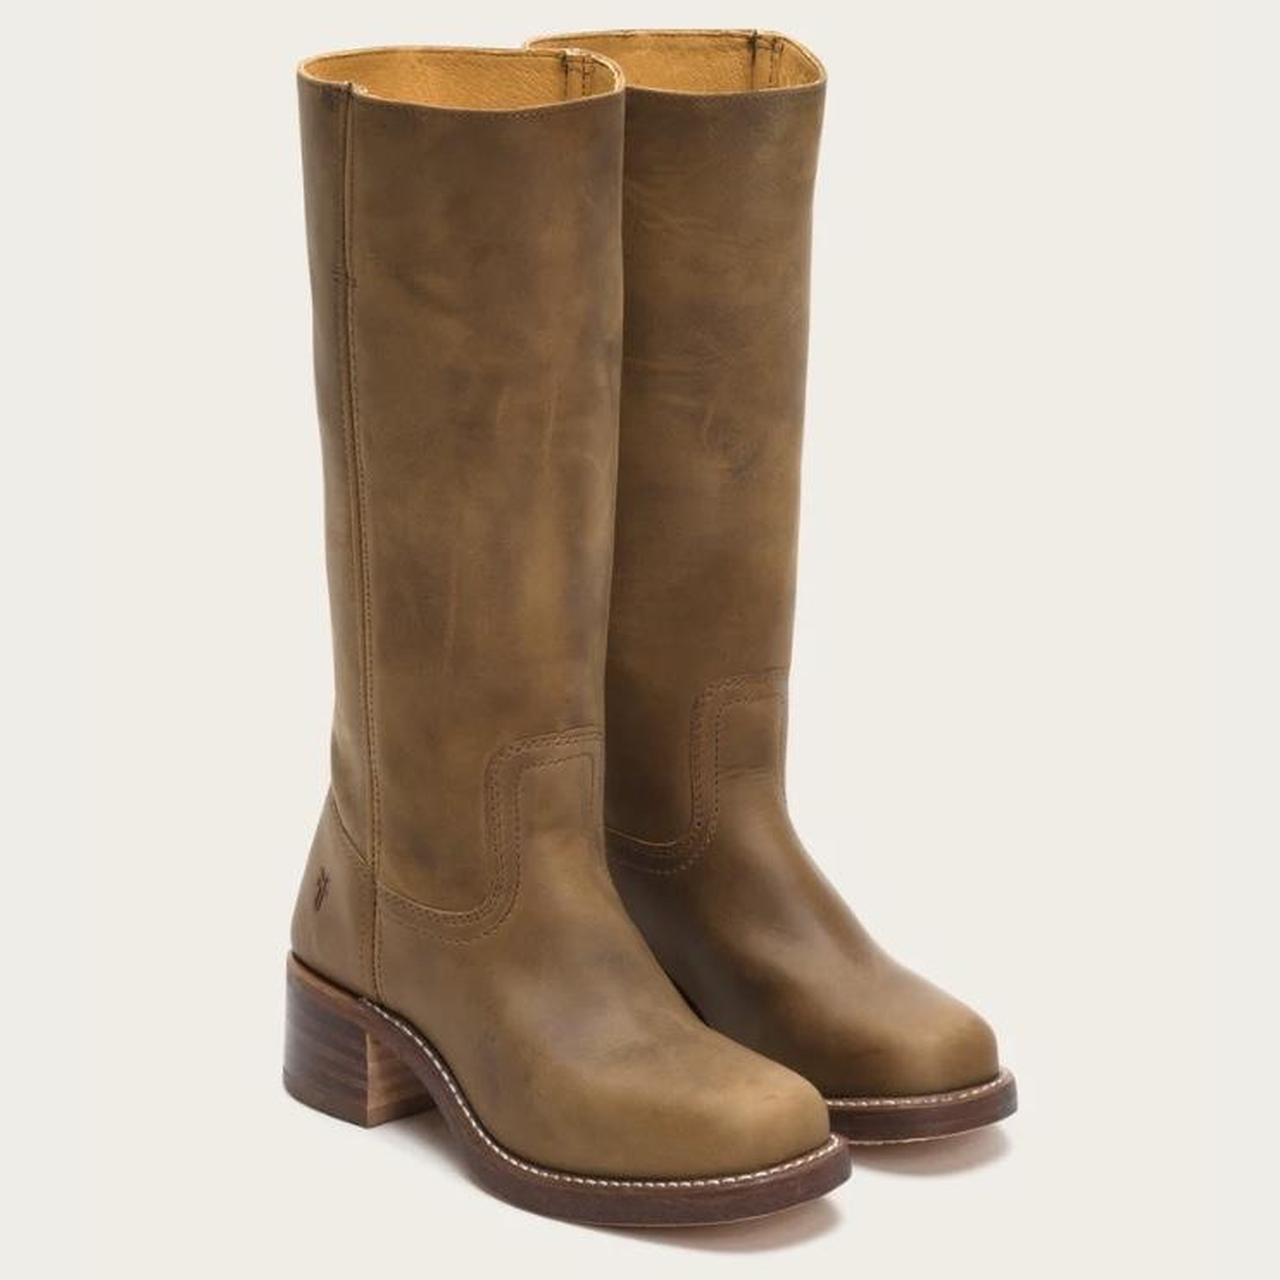 Frye Women's Brown and Tan Boots (2)